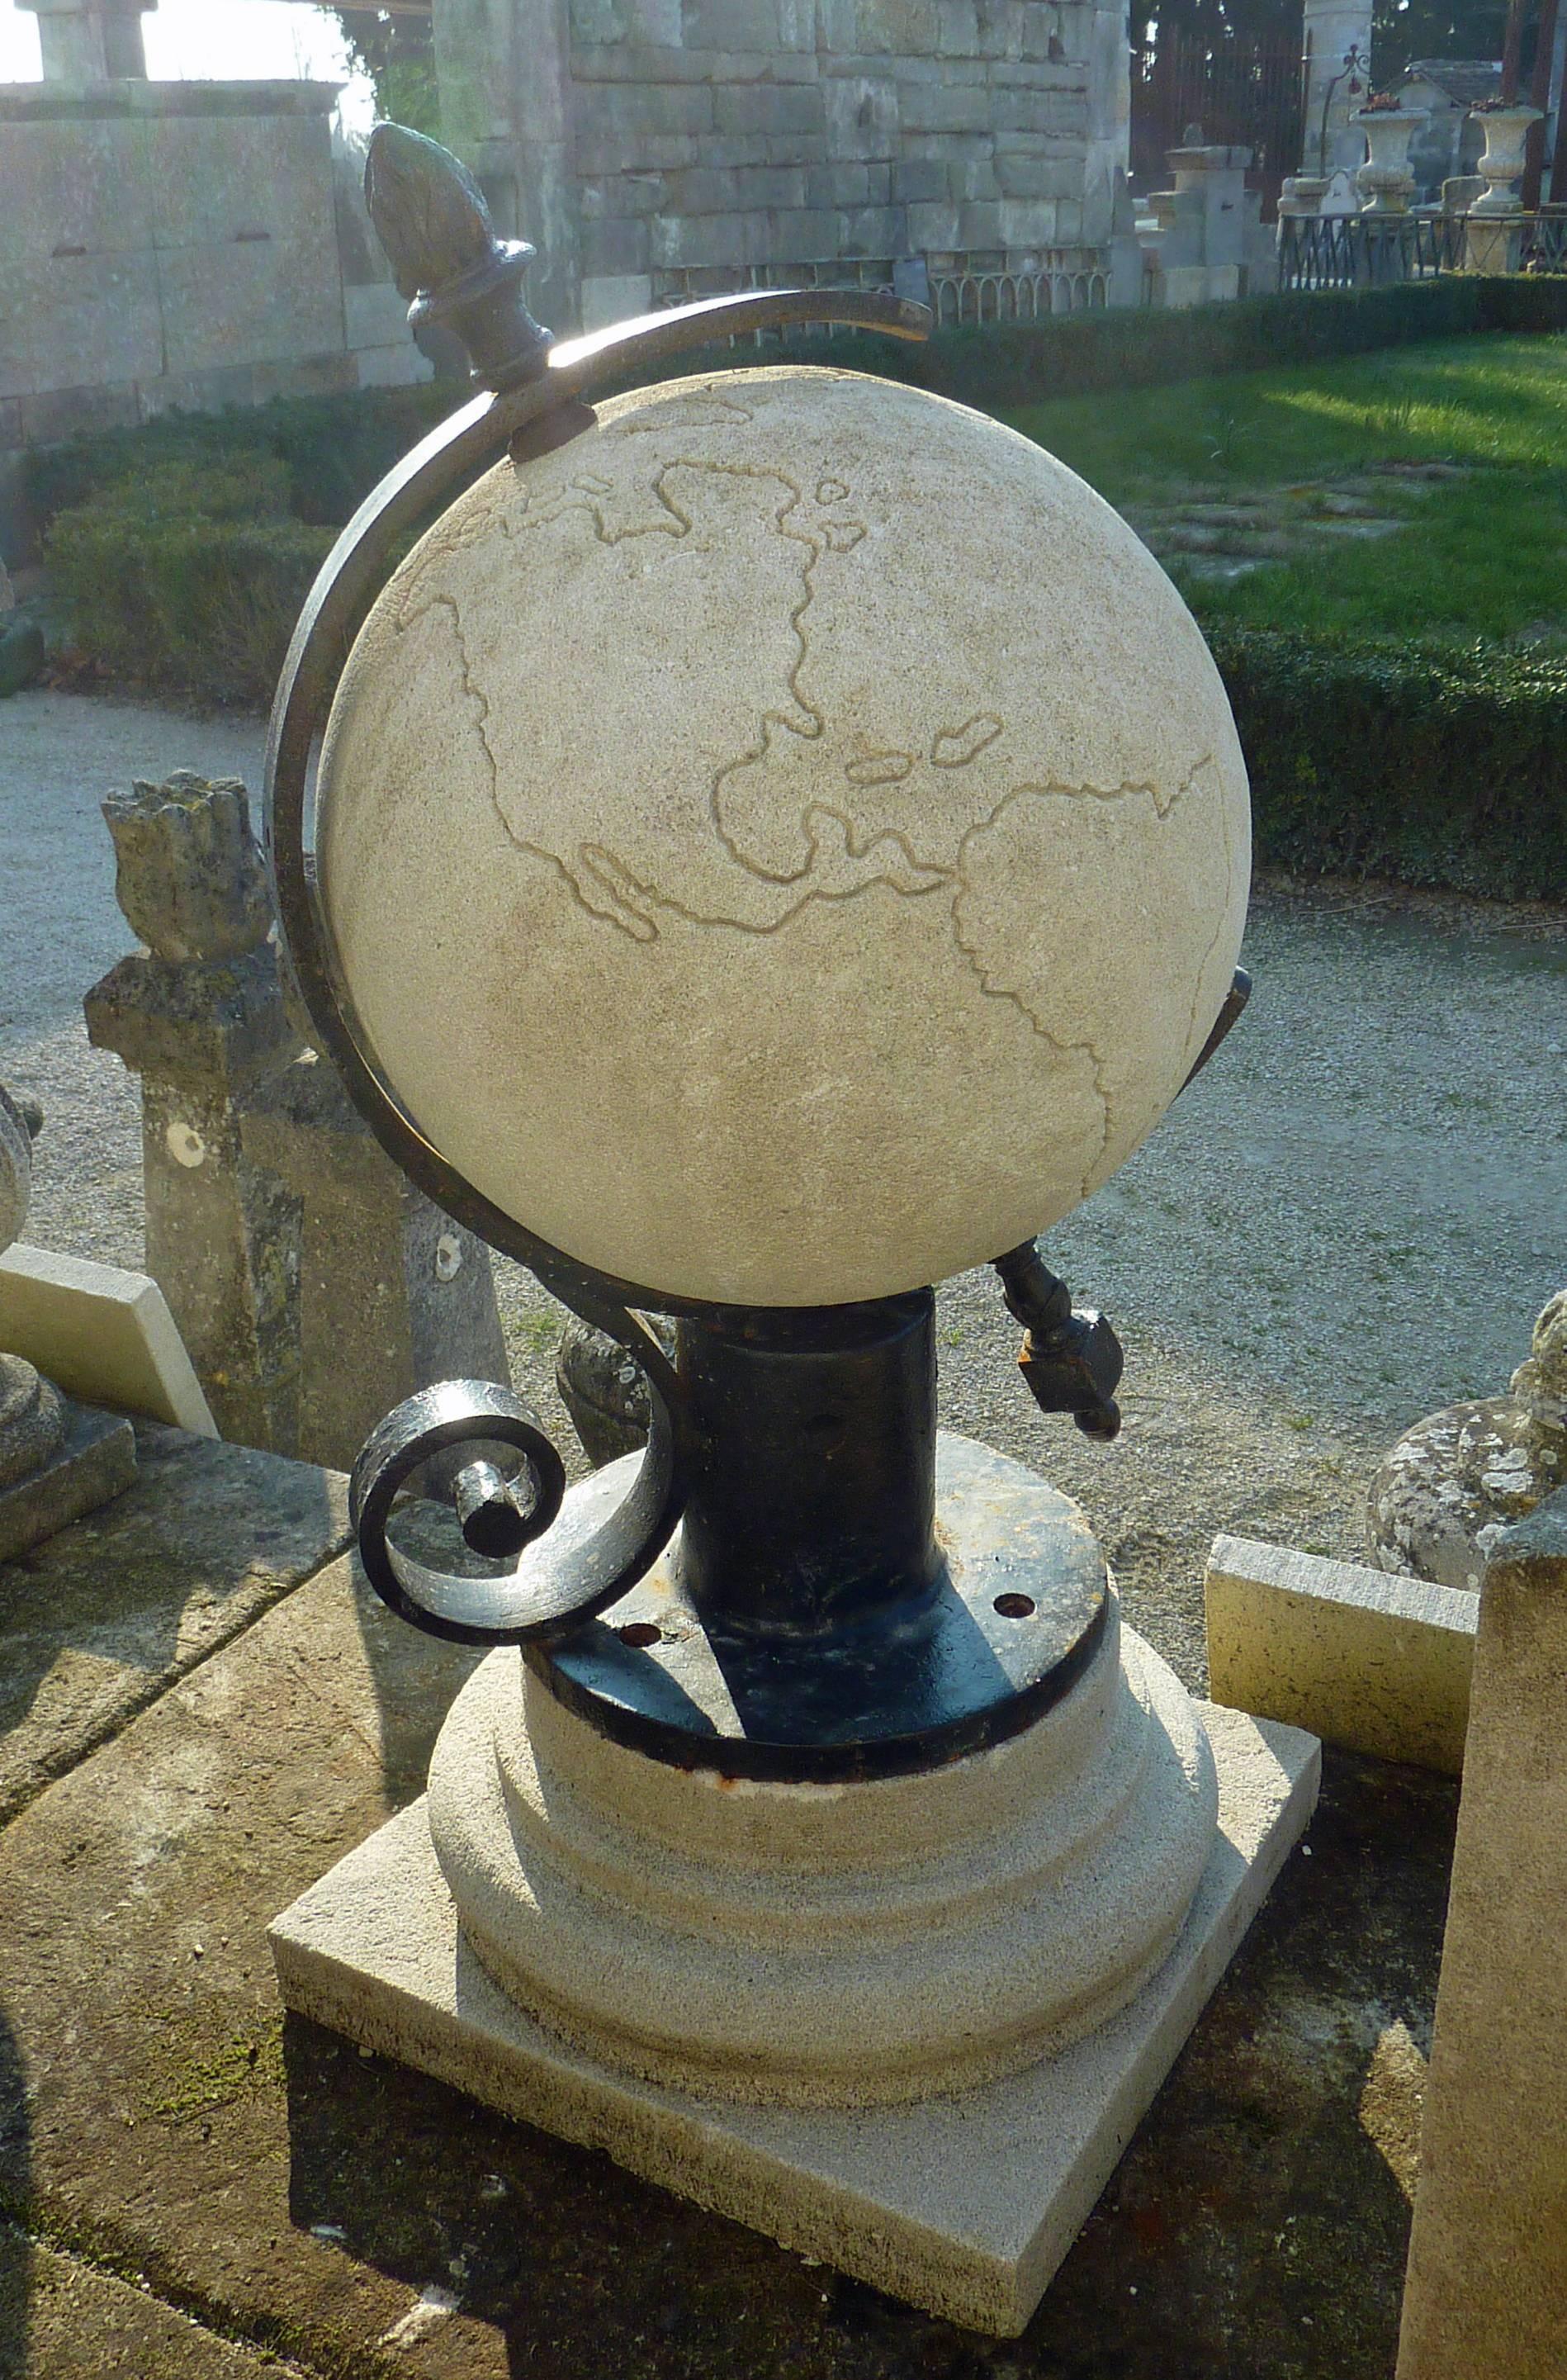 A one of the kind original decorative element, this wonderful terrestrial globe is composed of natural French limestone extracted in Provence, the Estaillades stone, and of wrought iron.

Anchored to a round molded base in stone, this globe with